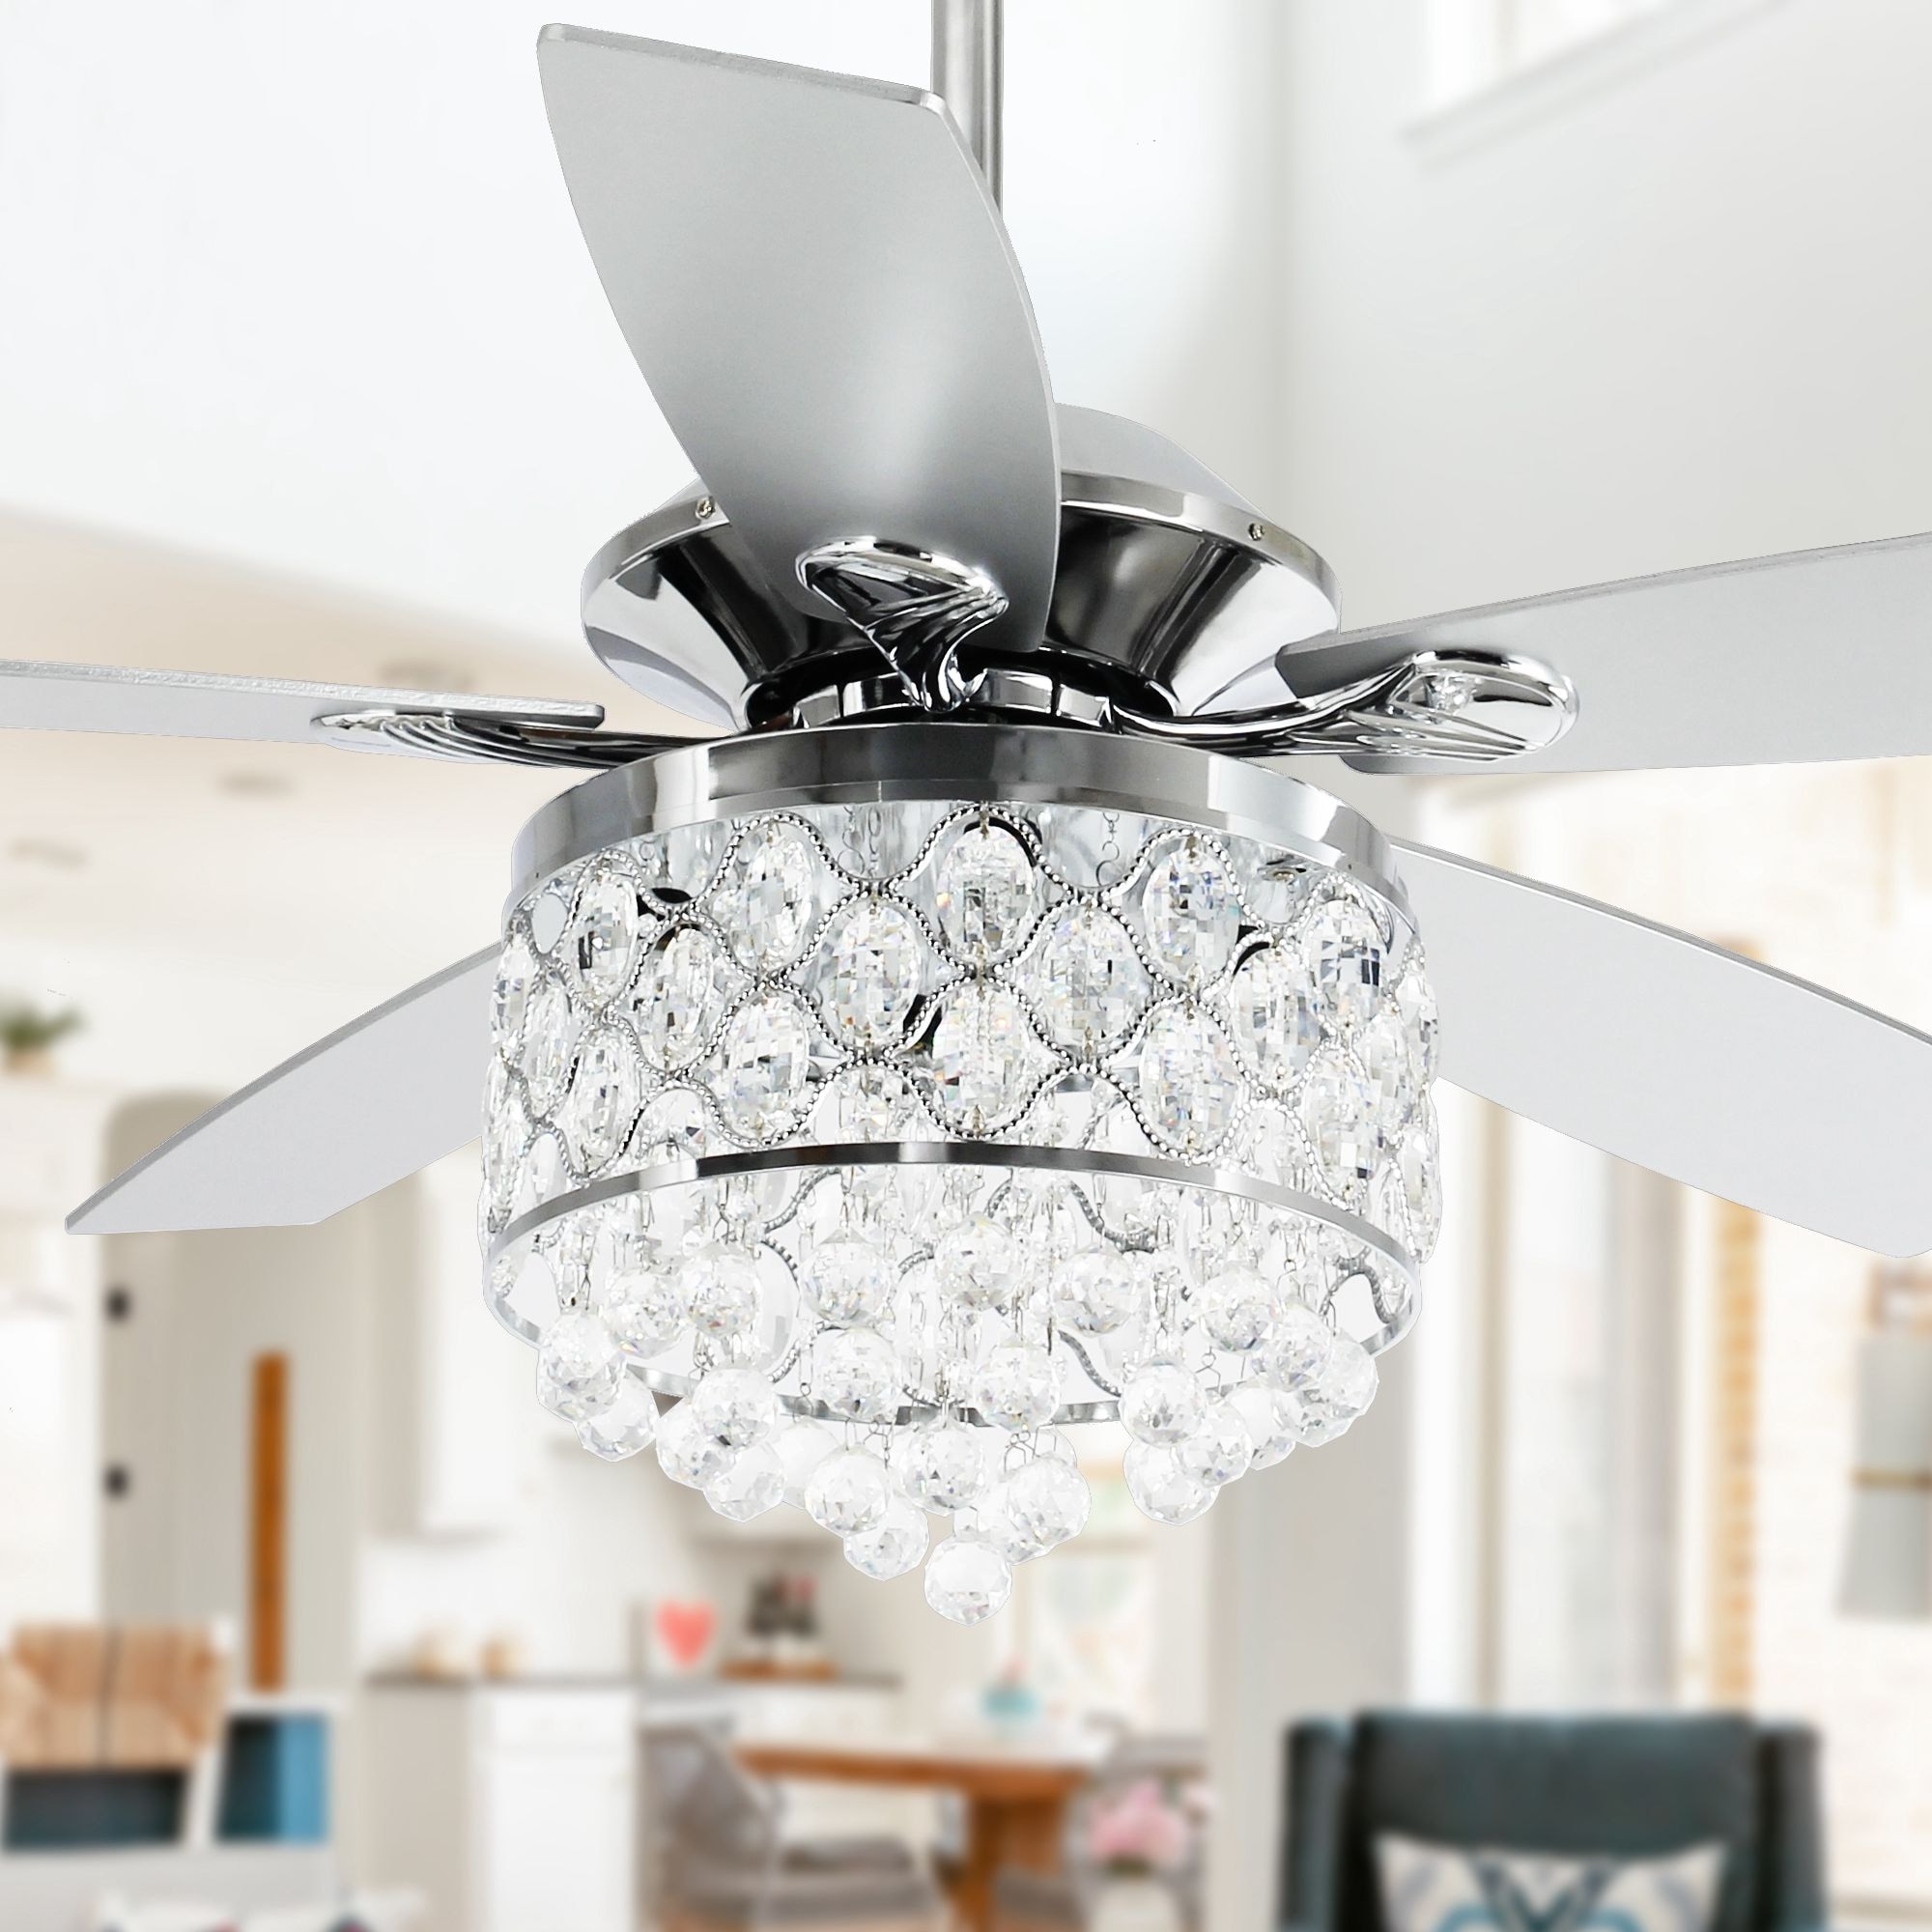 Chrome Crystal 4 Light Chandelier Ceiling Fan With Remote On Sale Overstock 28881690